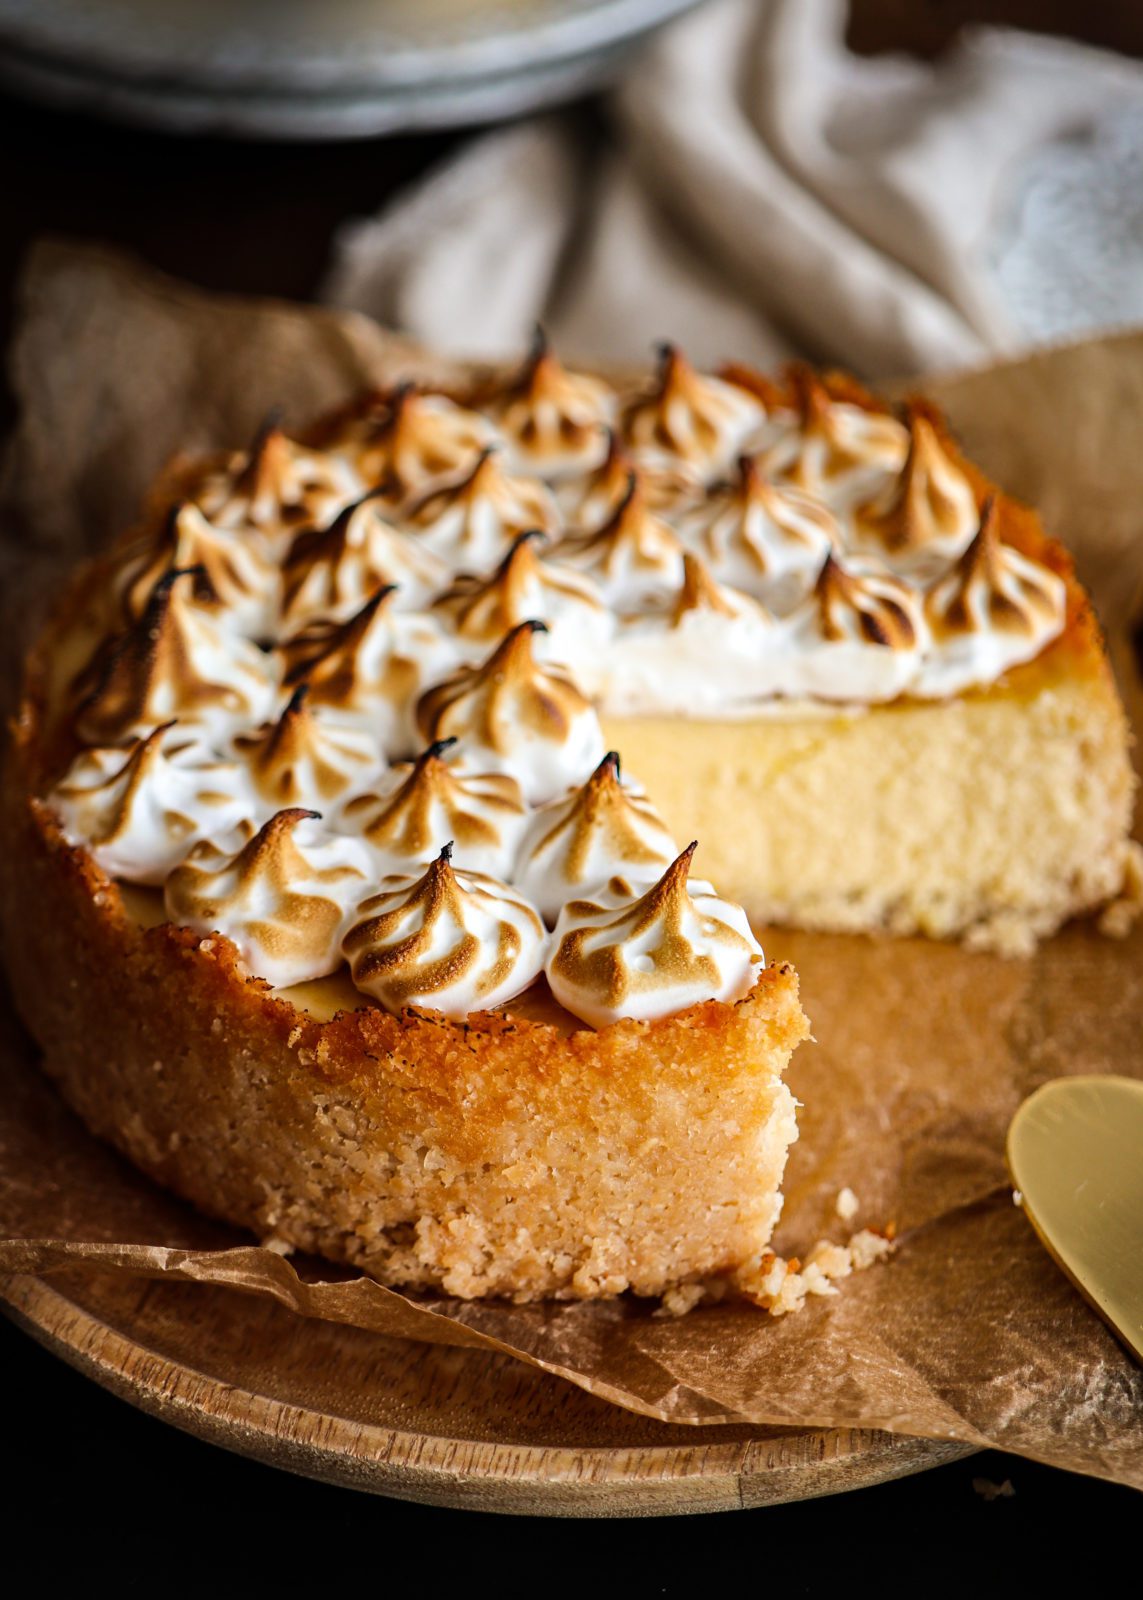 Lemon Coconut Cheesecake with Meringue topping